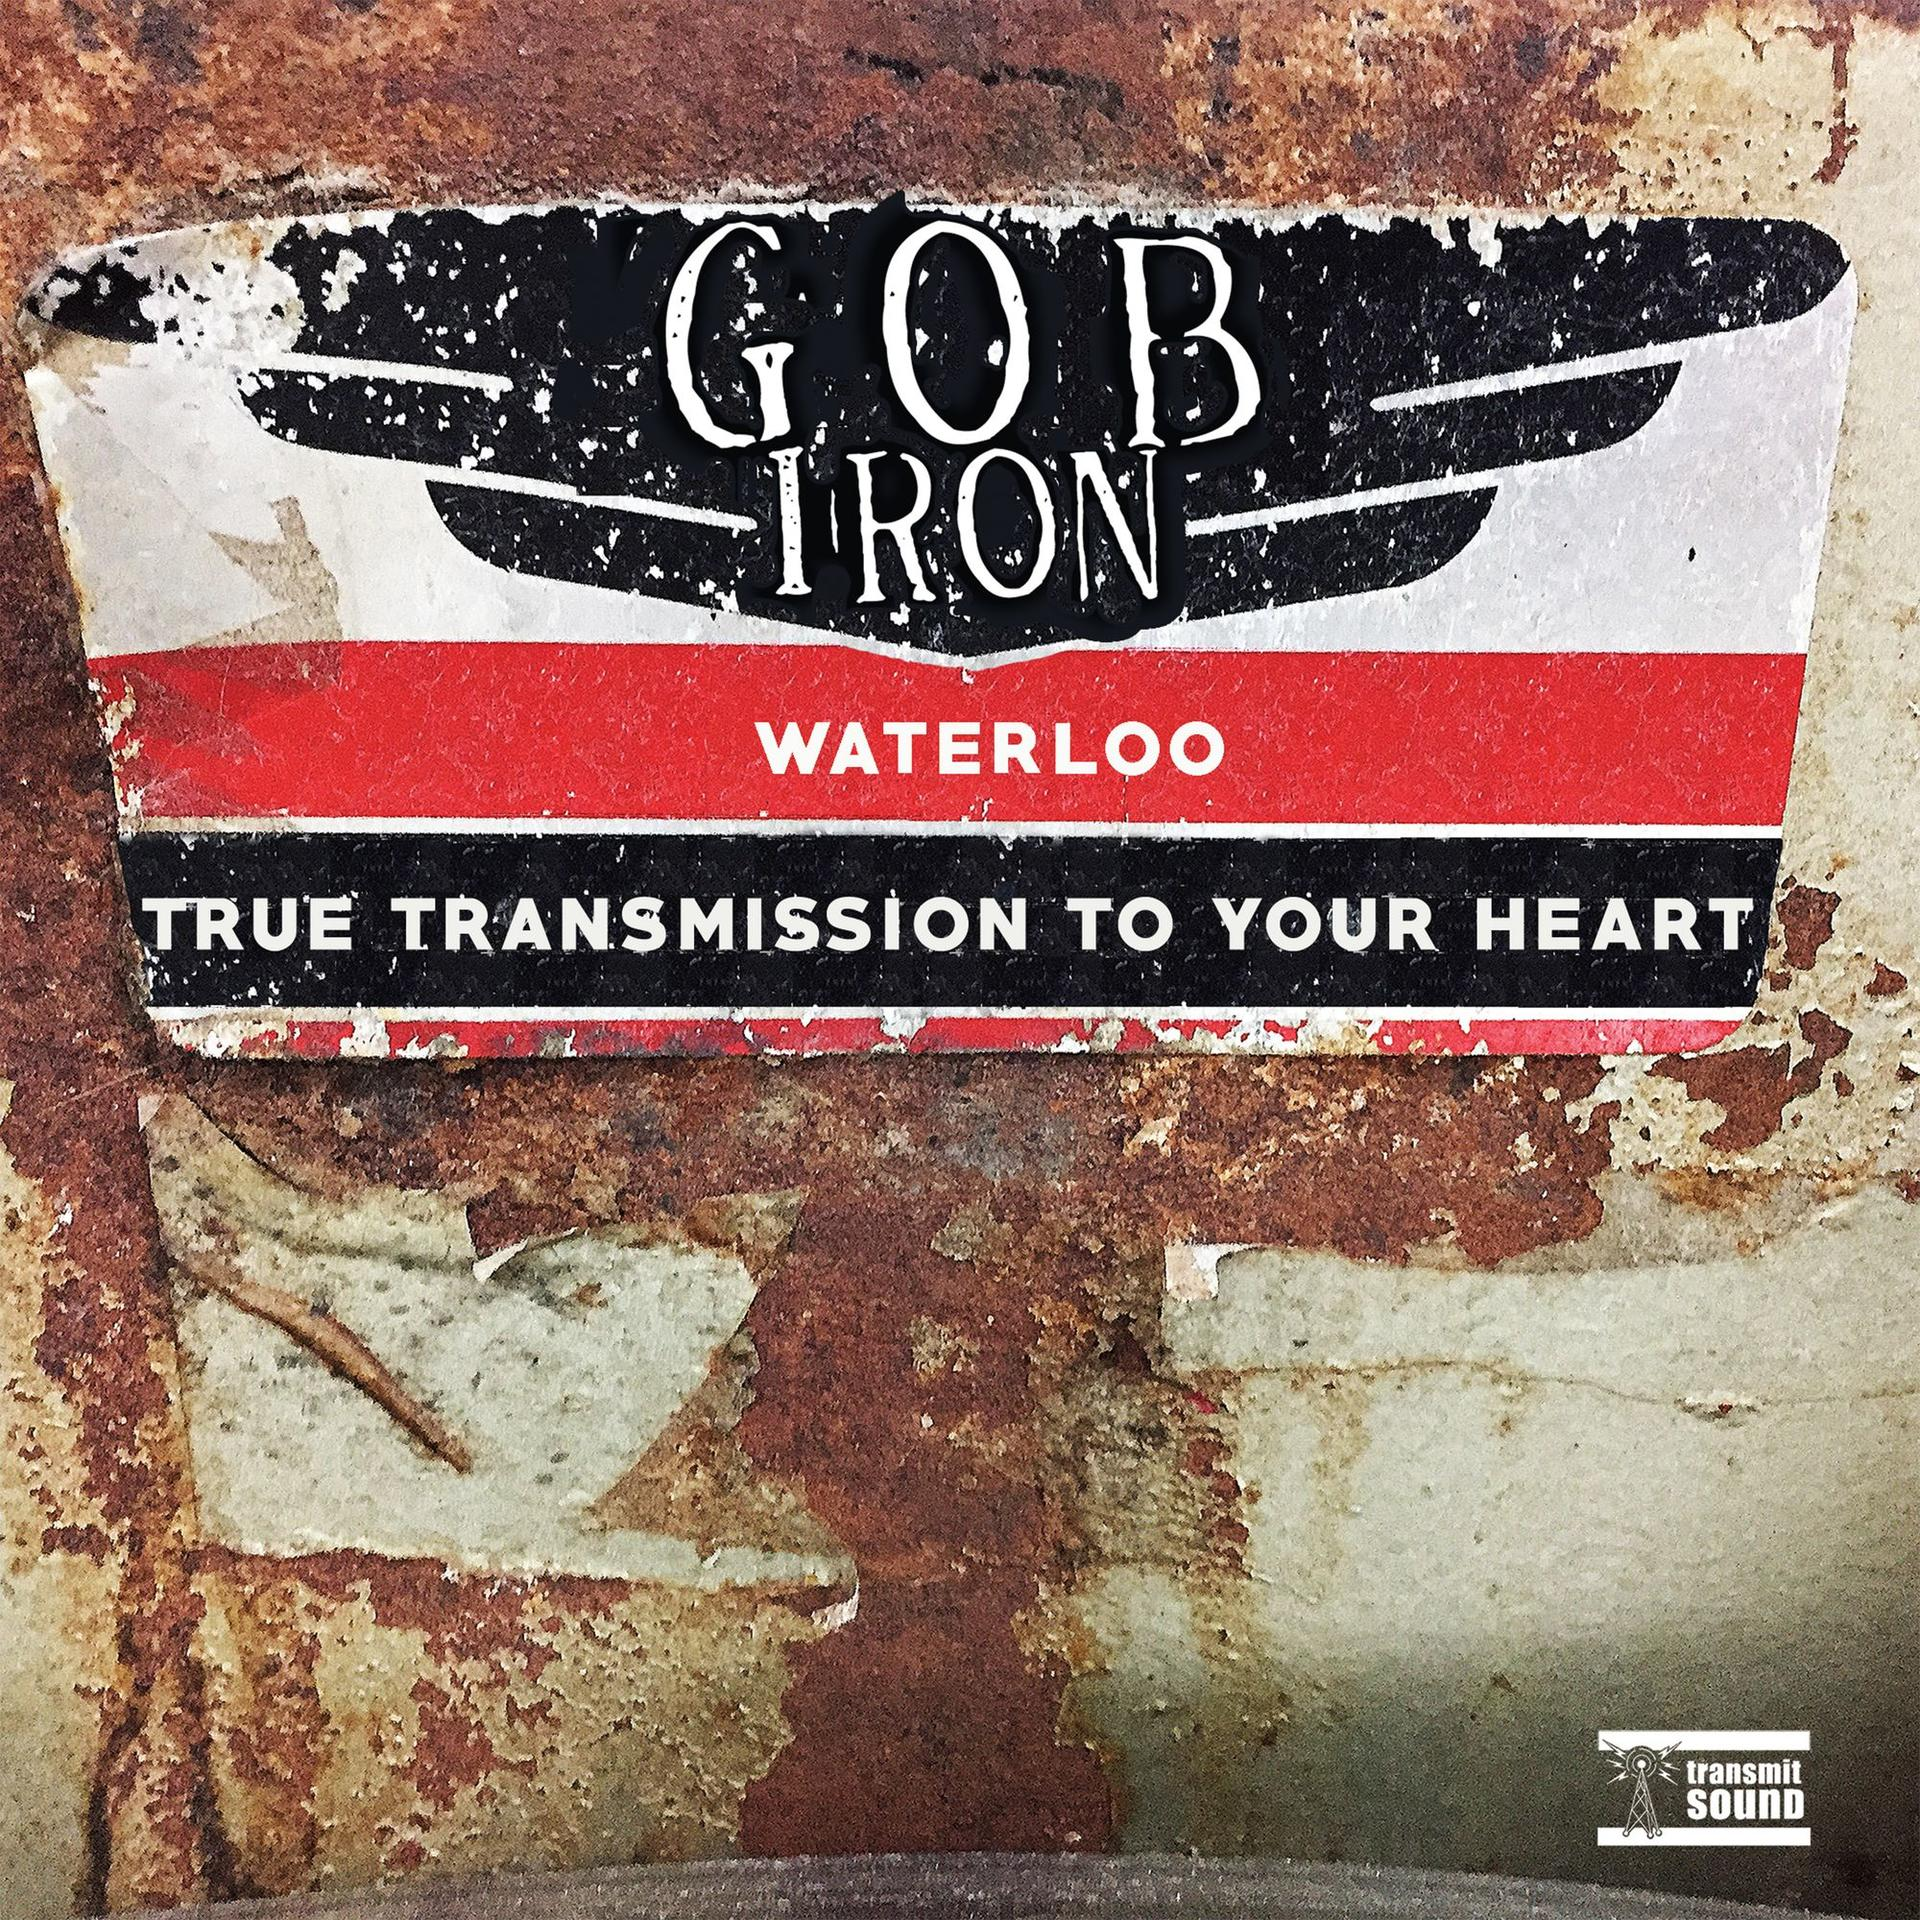 HEART Gob Iron (Vinyl) TRANSMISSION YOUR - TO 7-WATERLOO/TRUE -